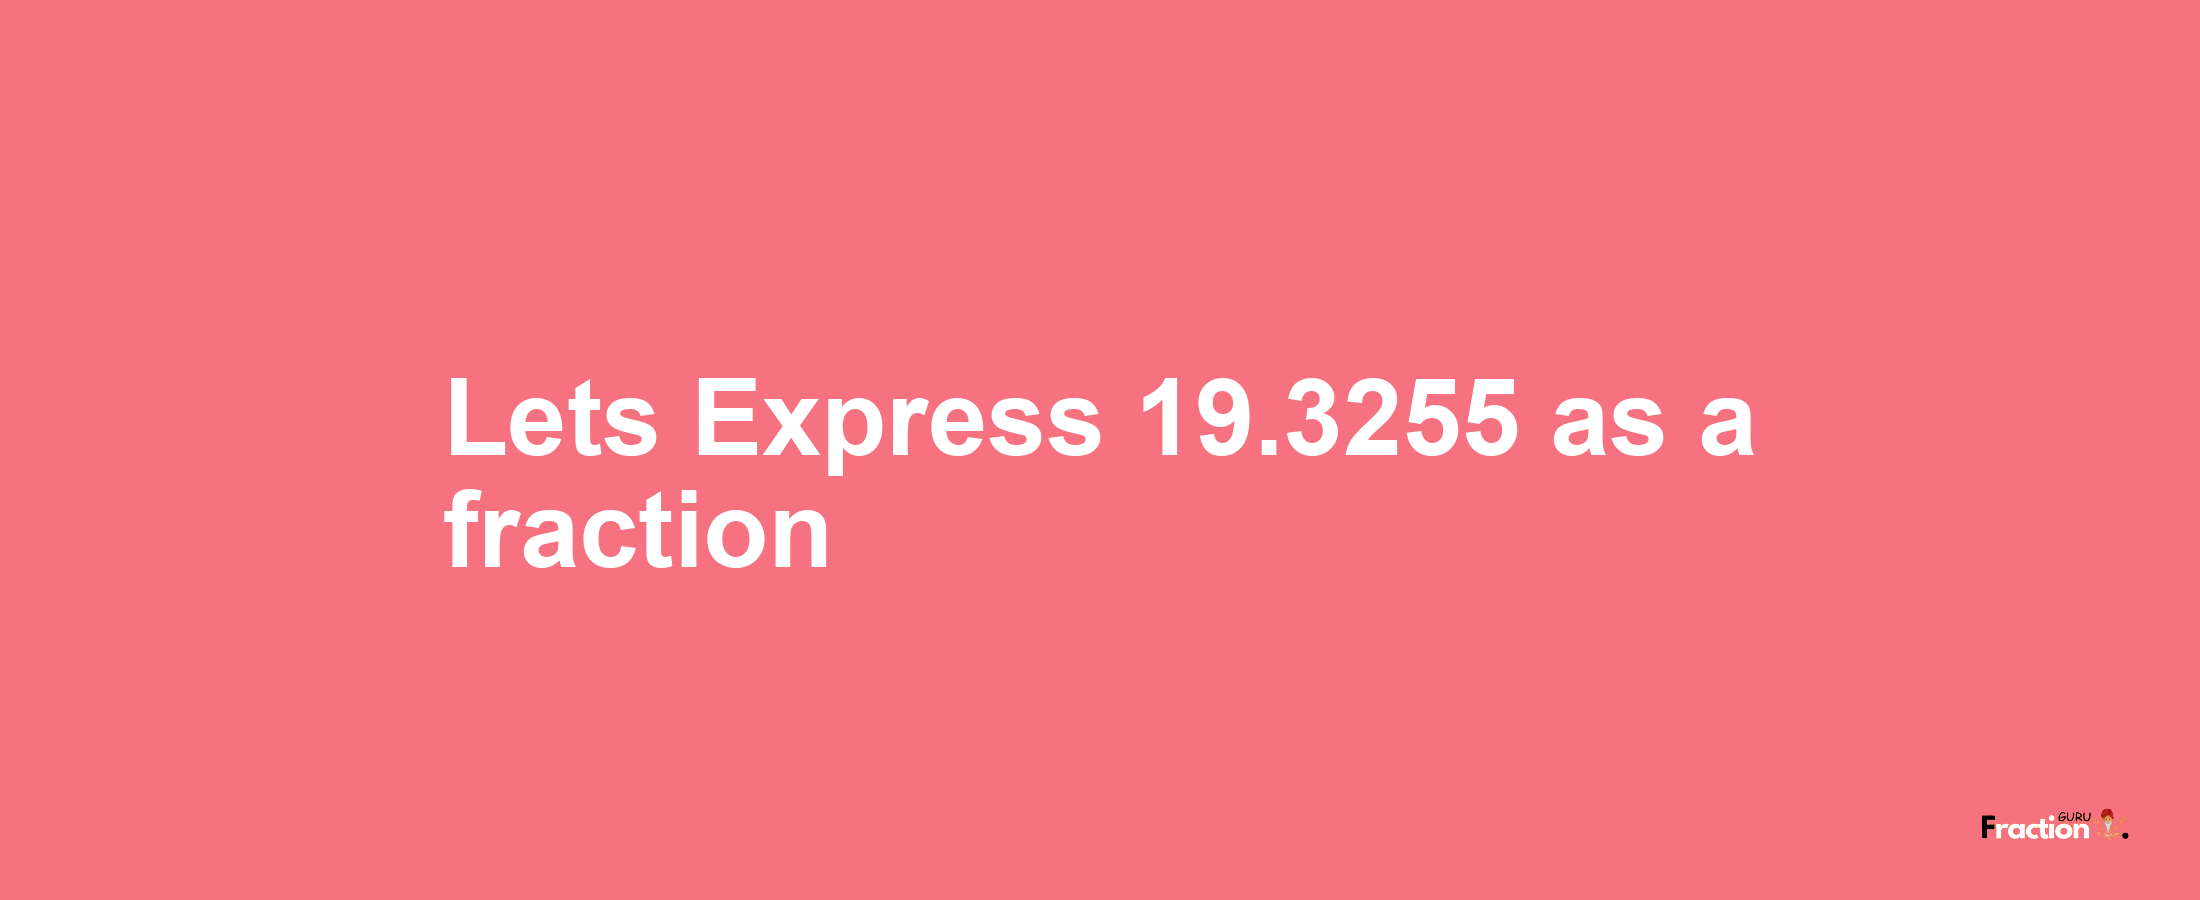 Lets Express 19.3255 as afraction